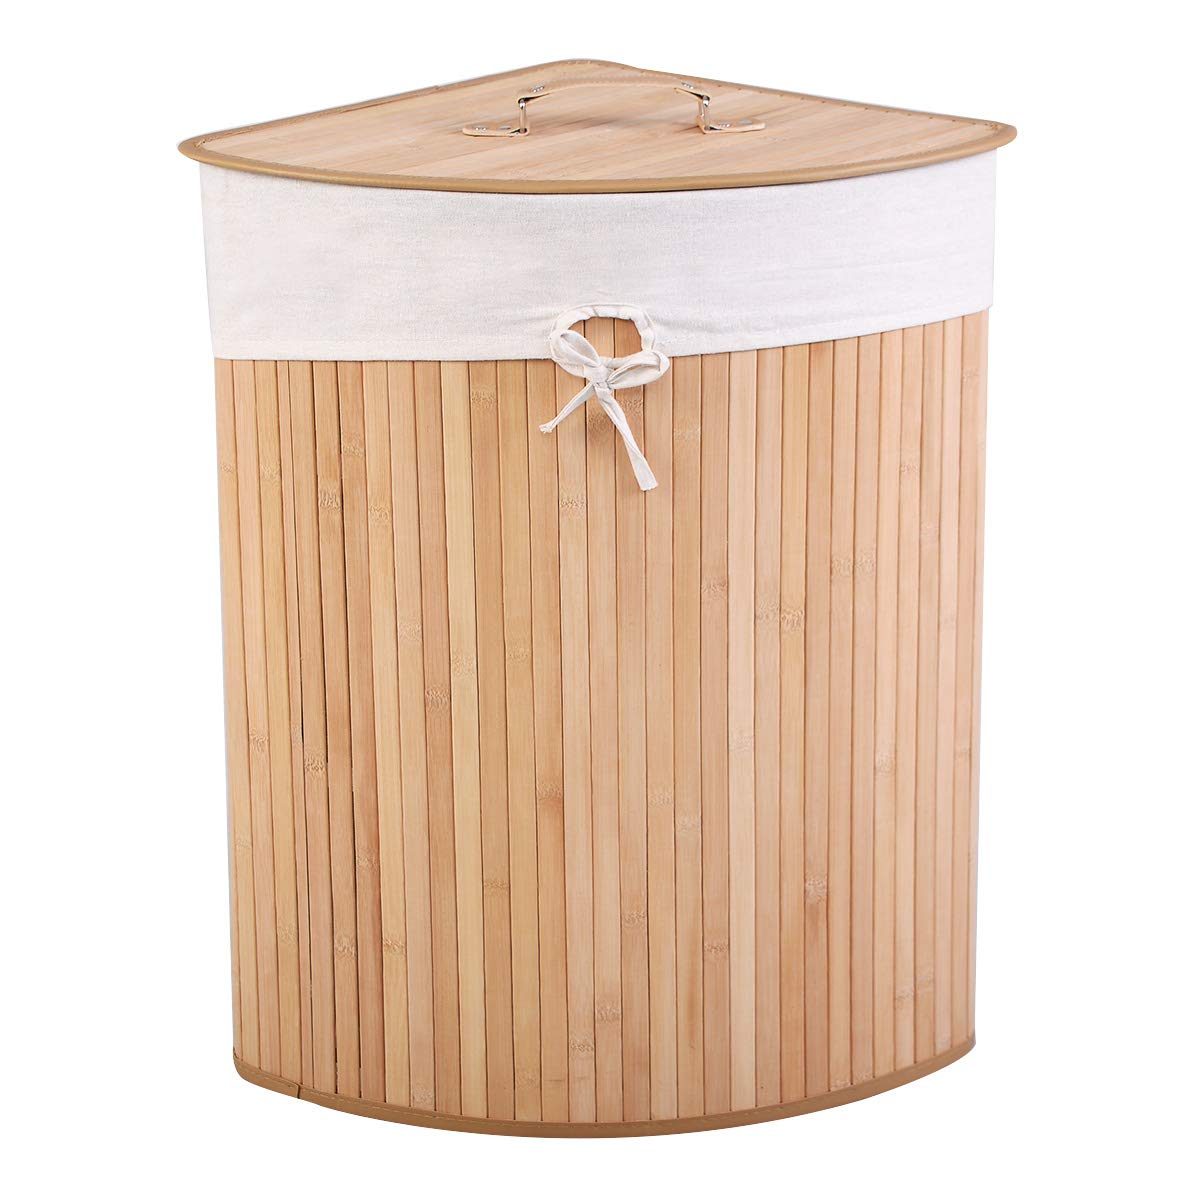 Giantex Corner Laundry Hamper with Lid, Bamboo Laundry Basket with Removable Liner and Handle